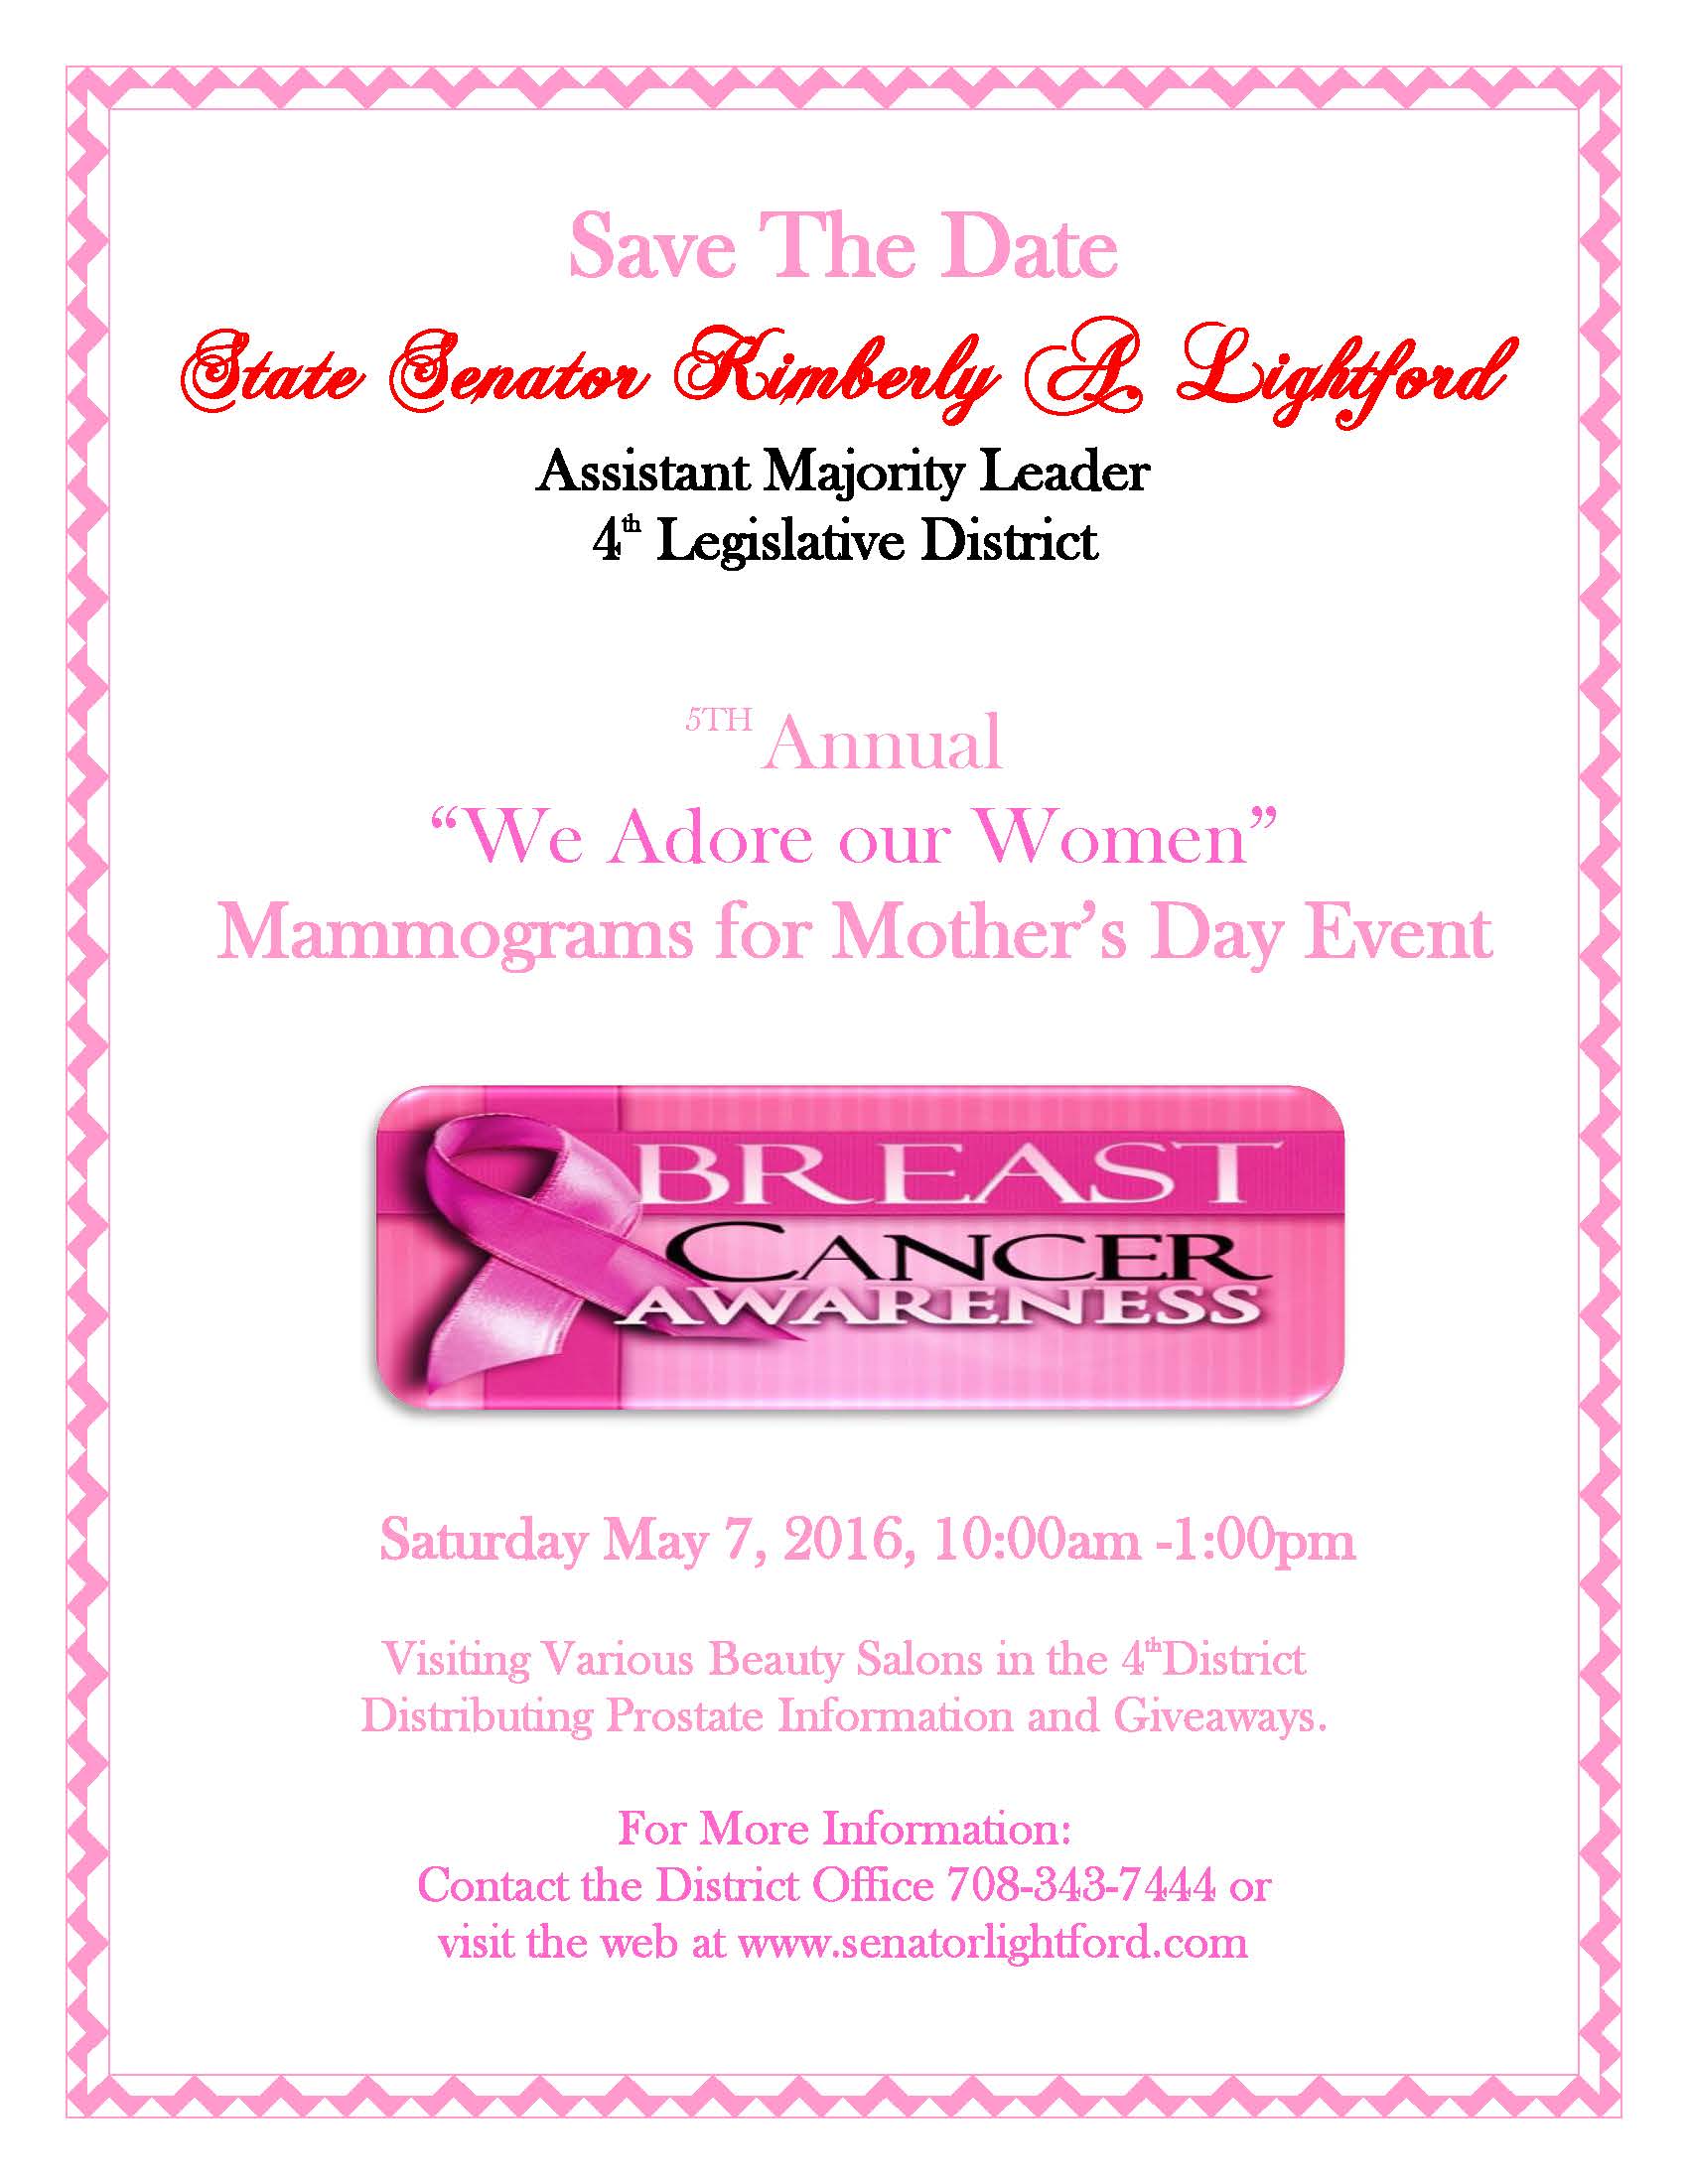 2016 Breast Cancer Save the Date Event Flier